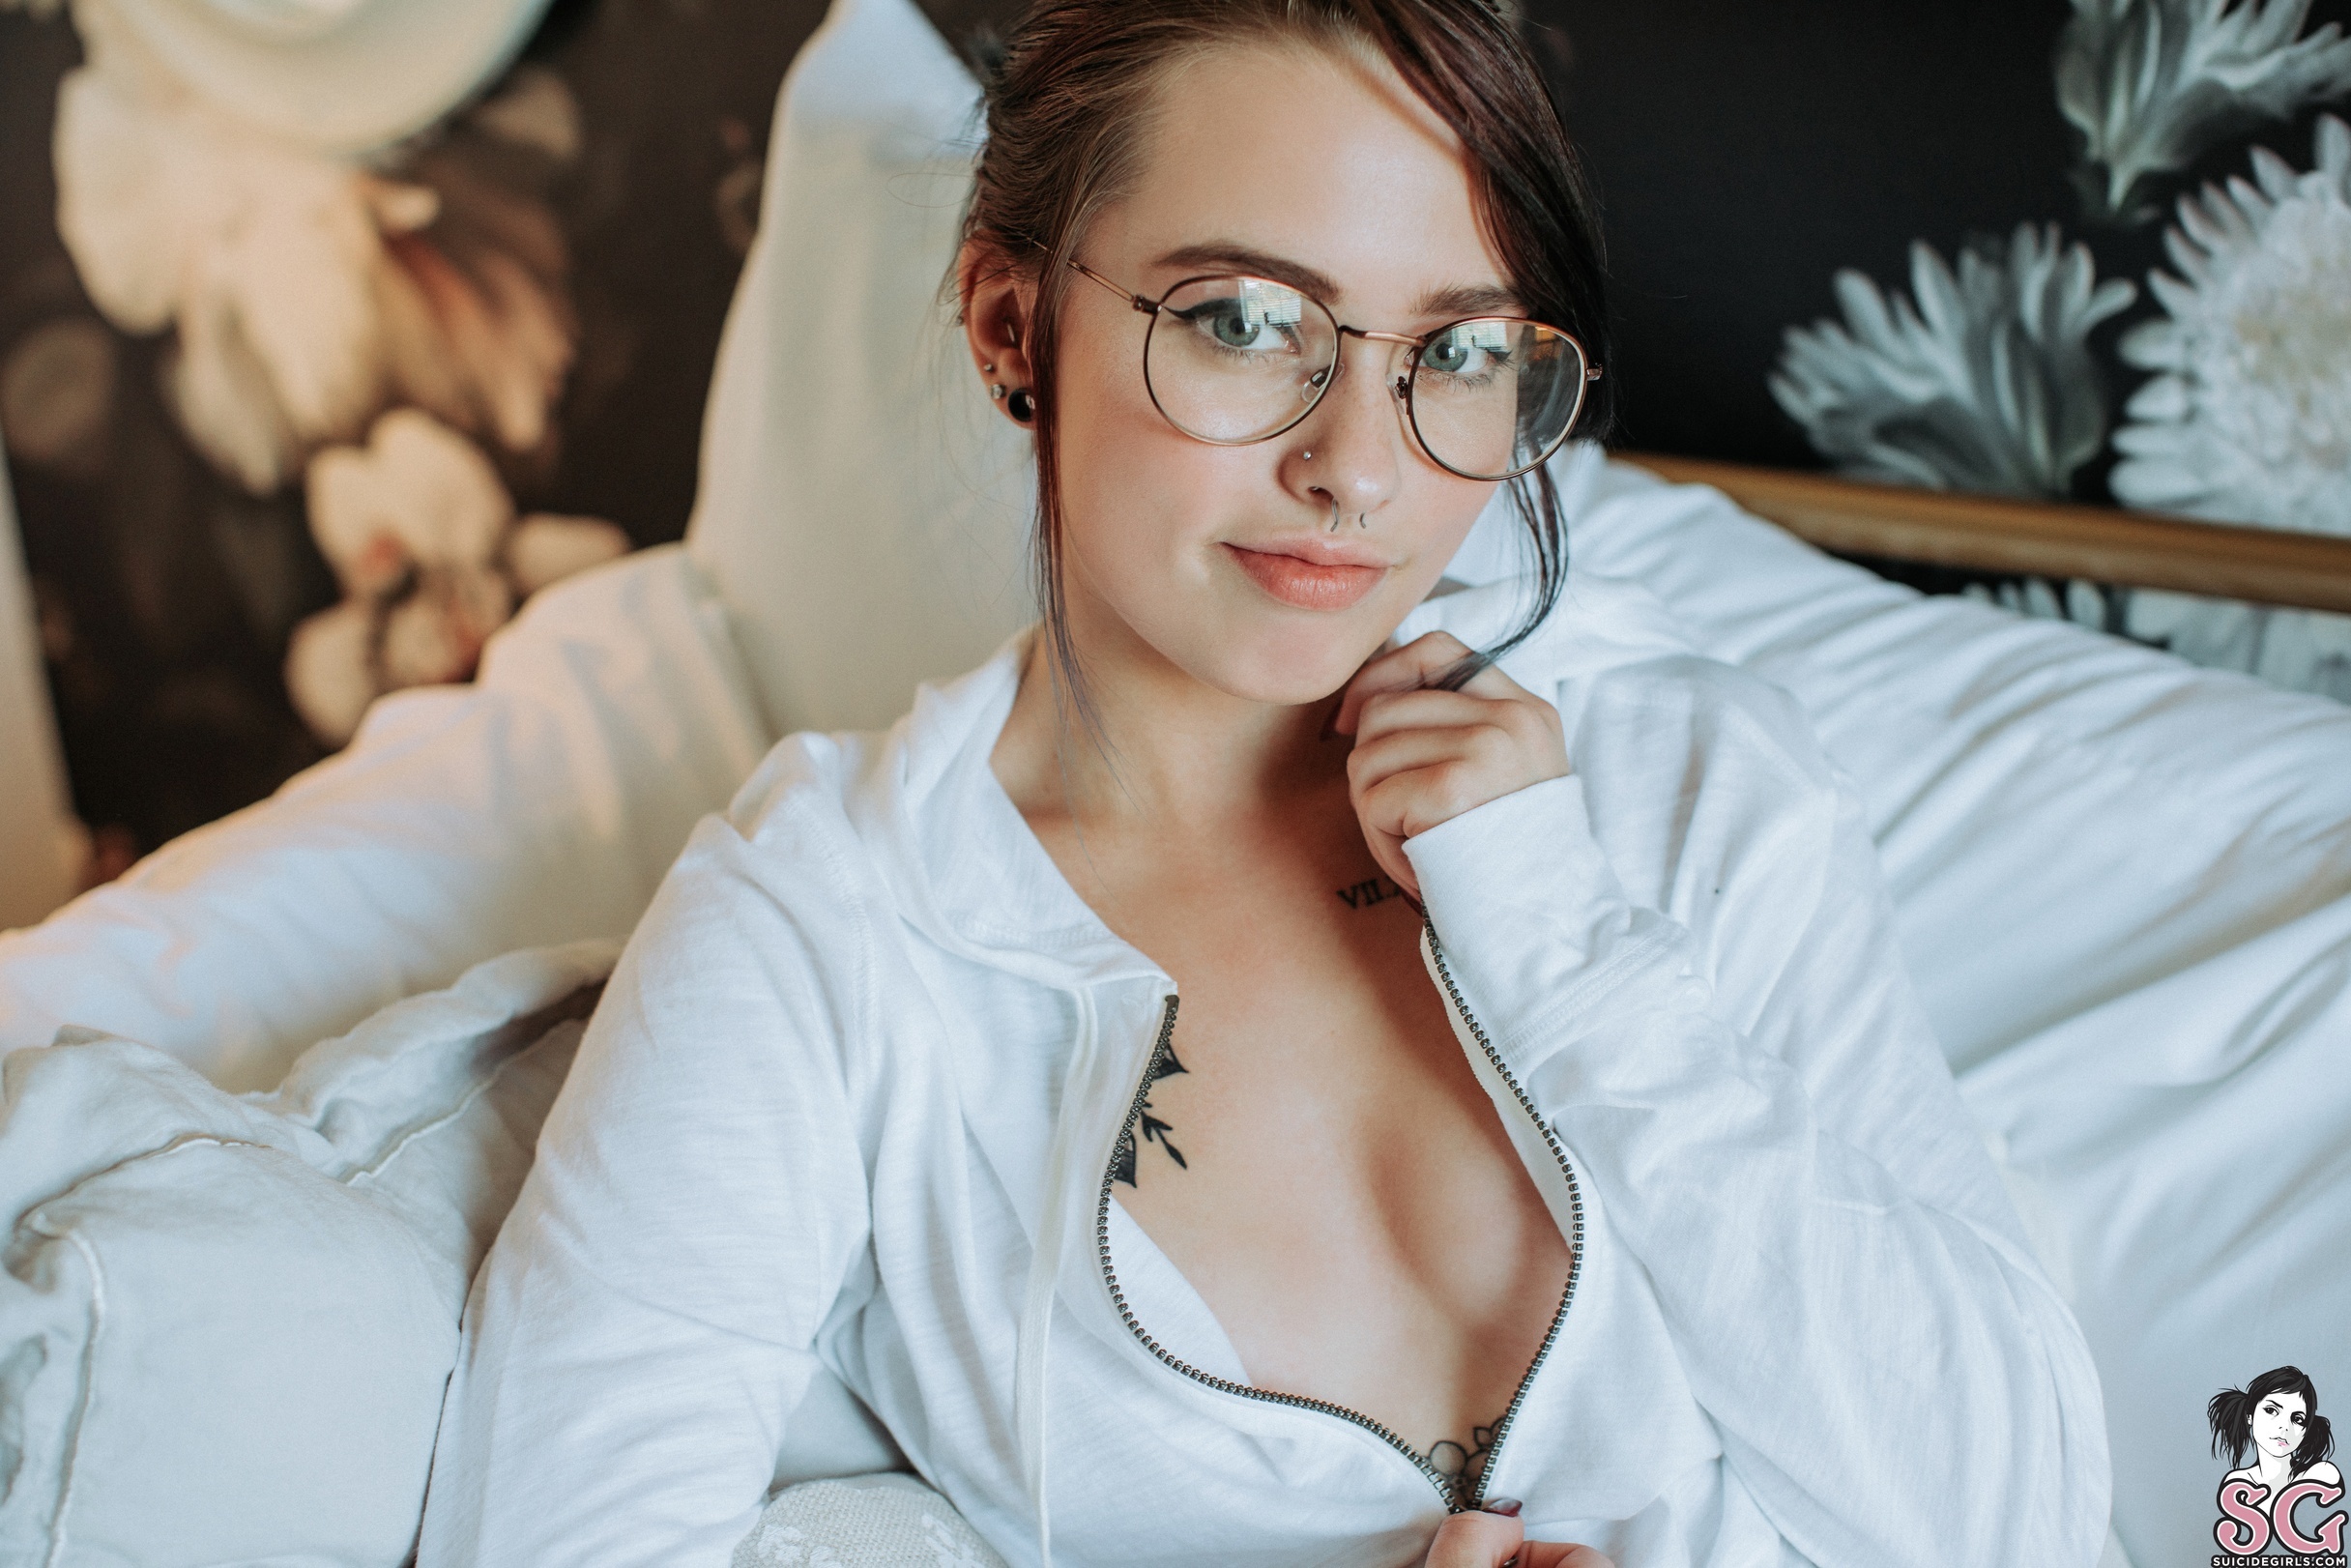 Indsigt tromme Roux women, brunette, Vyne, women with glasses, tattoo, pillow, glasses, Suicide  Girls, watermarked | 2432x1622 Wallpaper - wallhaven.cc